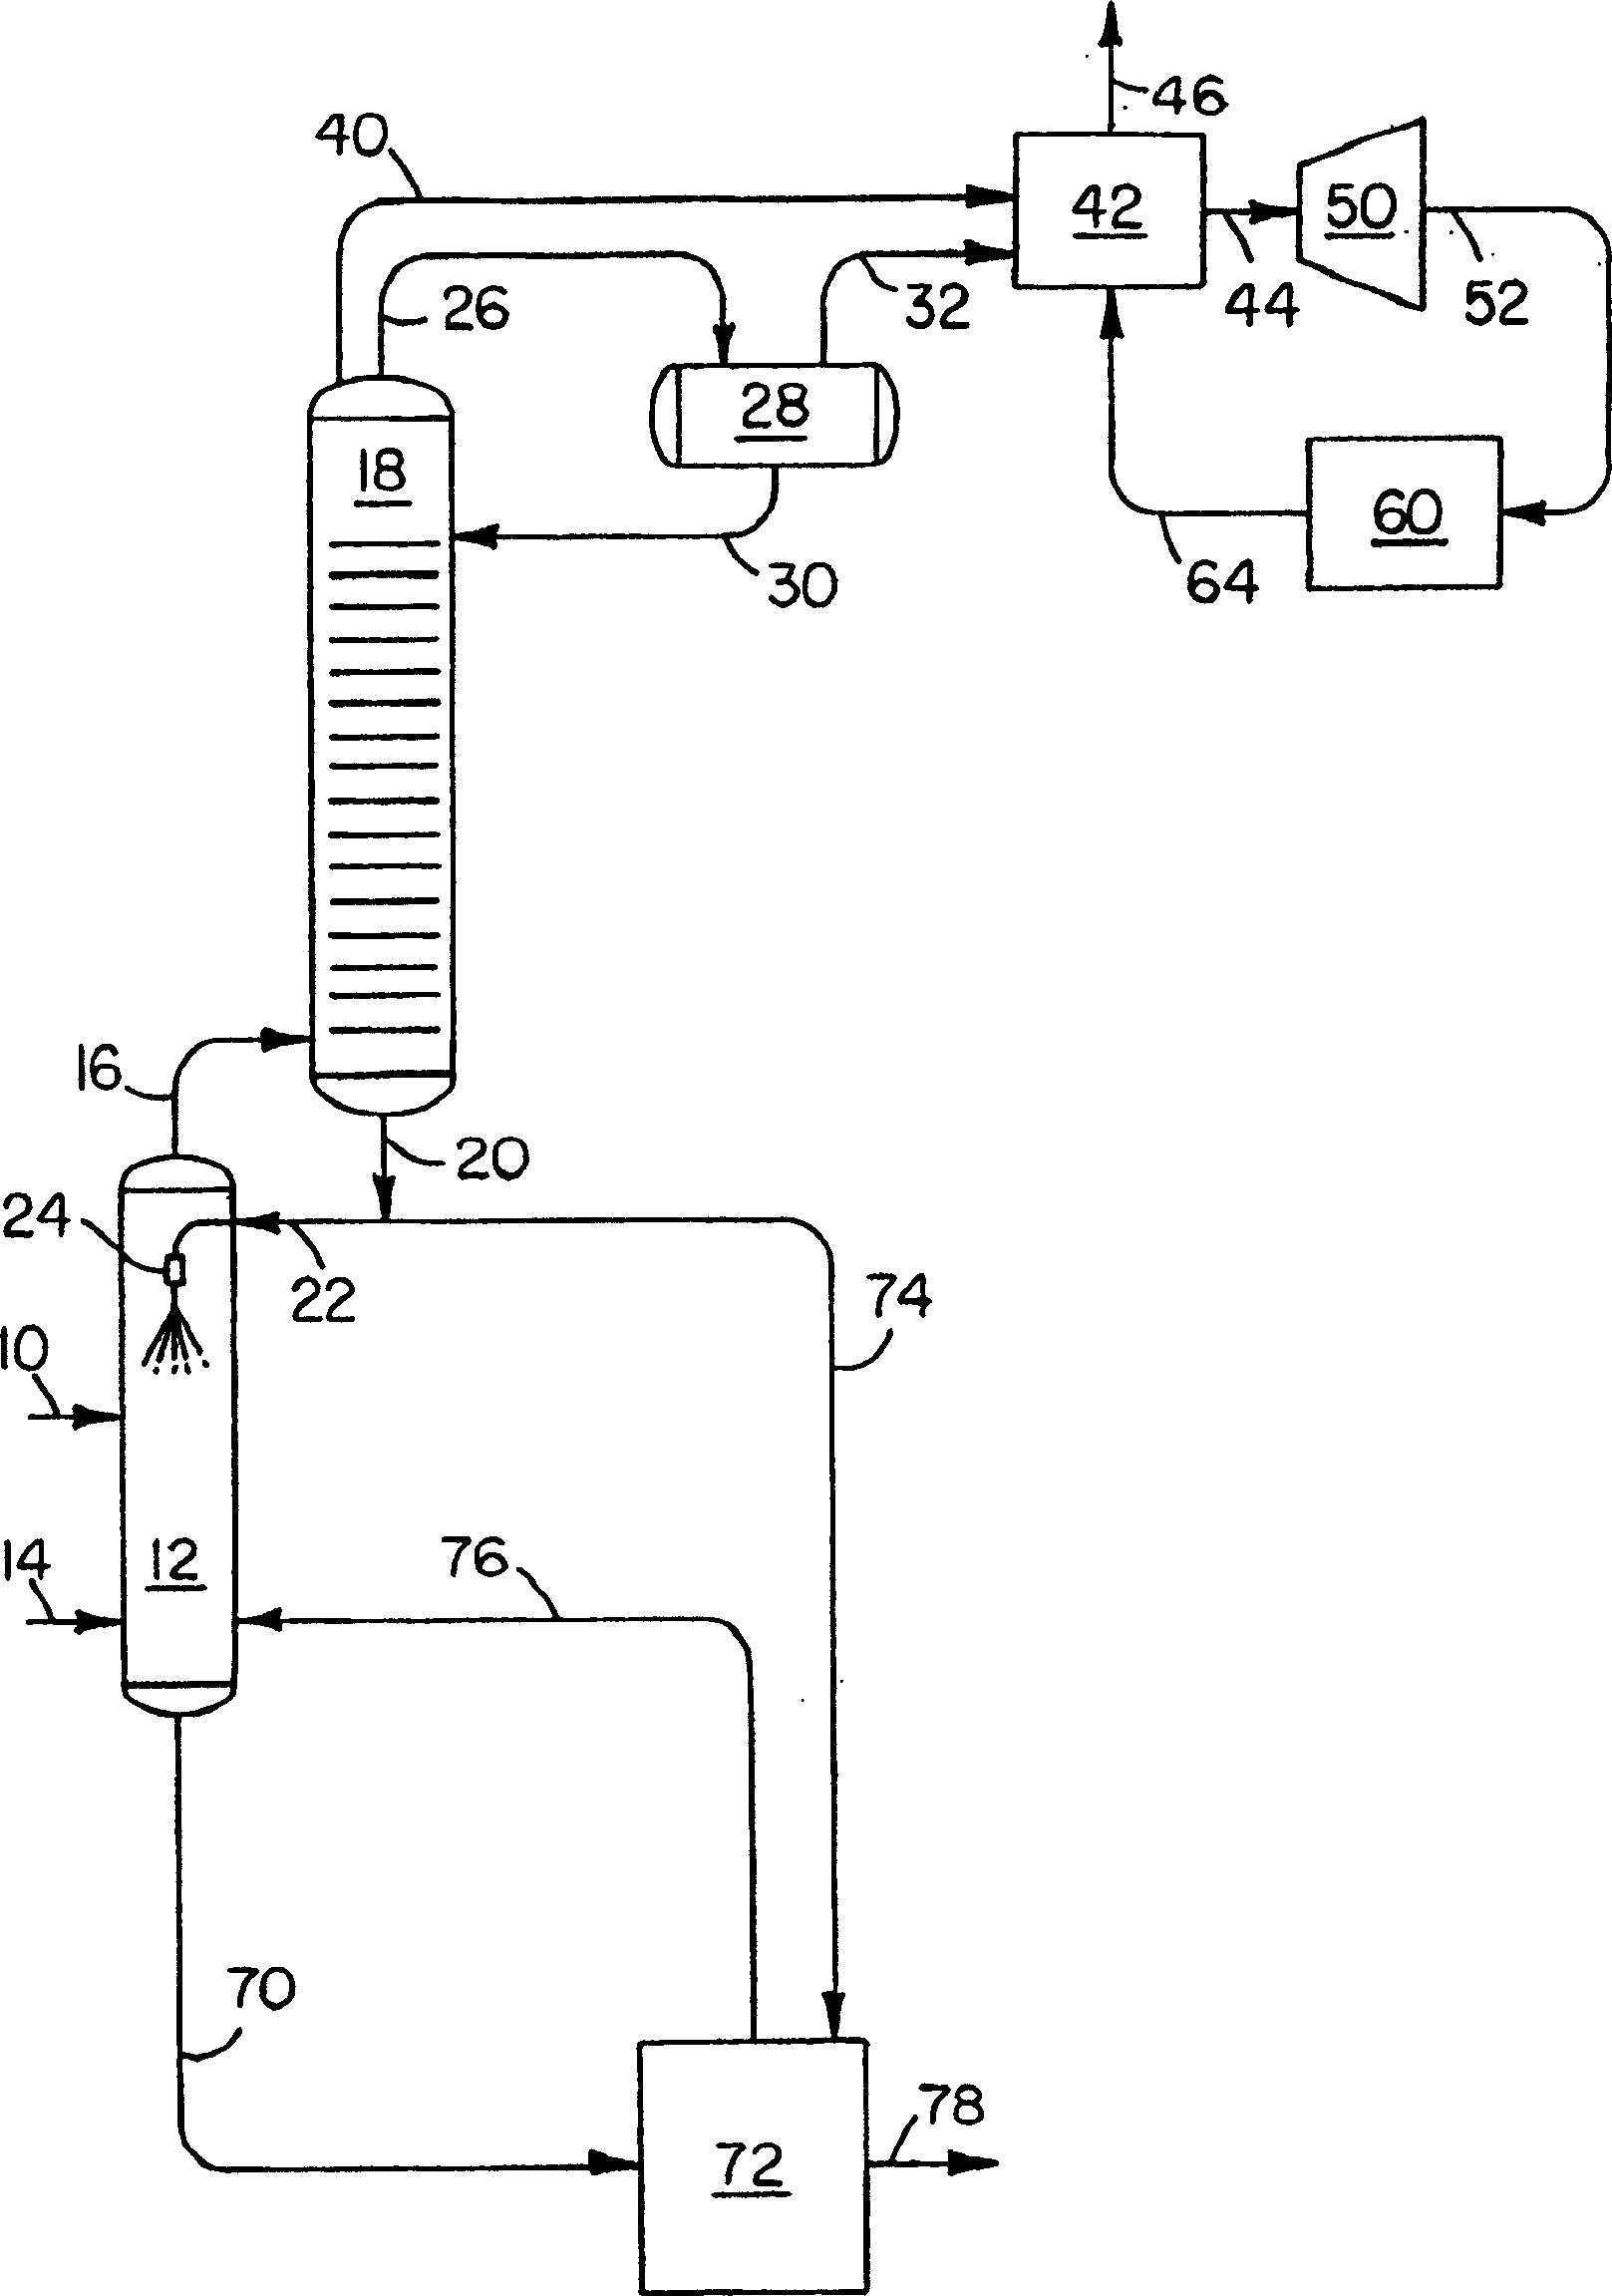 Process for production of aromatic carboxylic acids with improved water removal technique